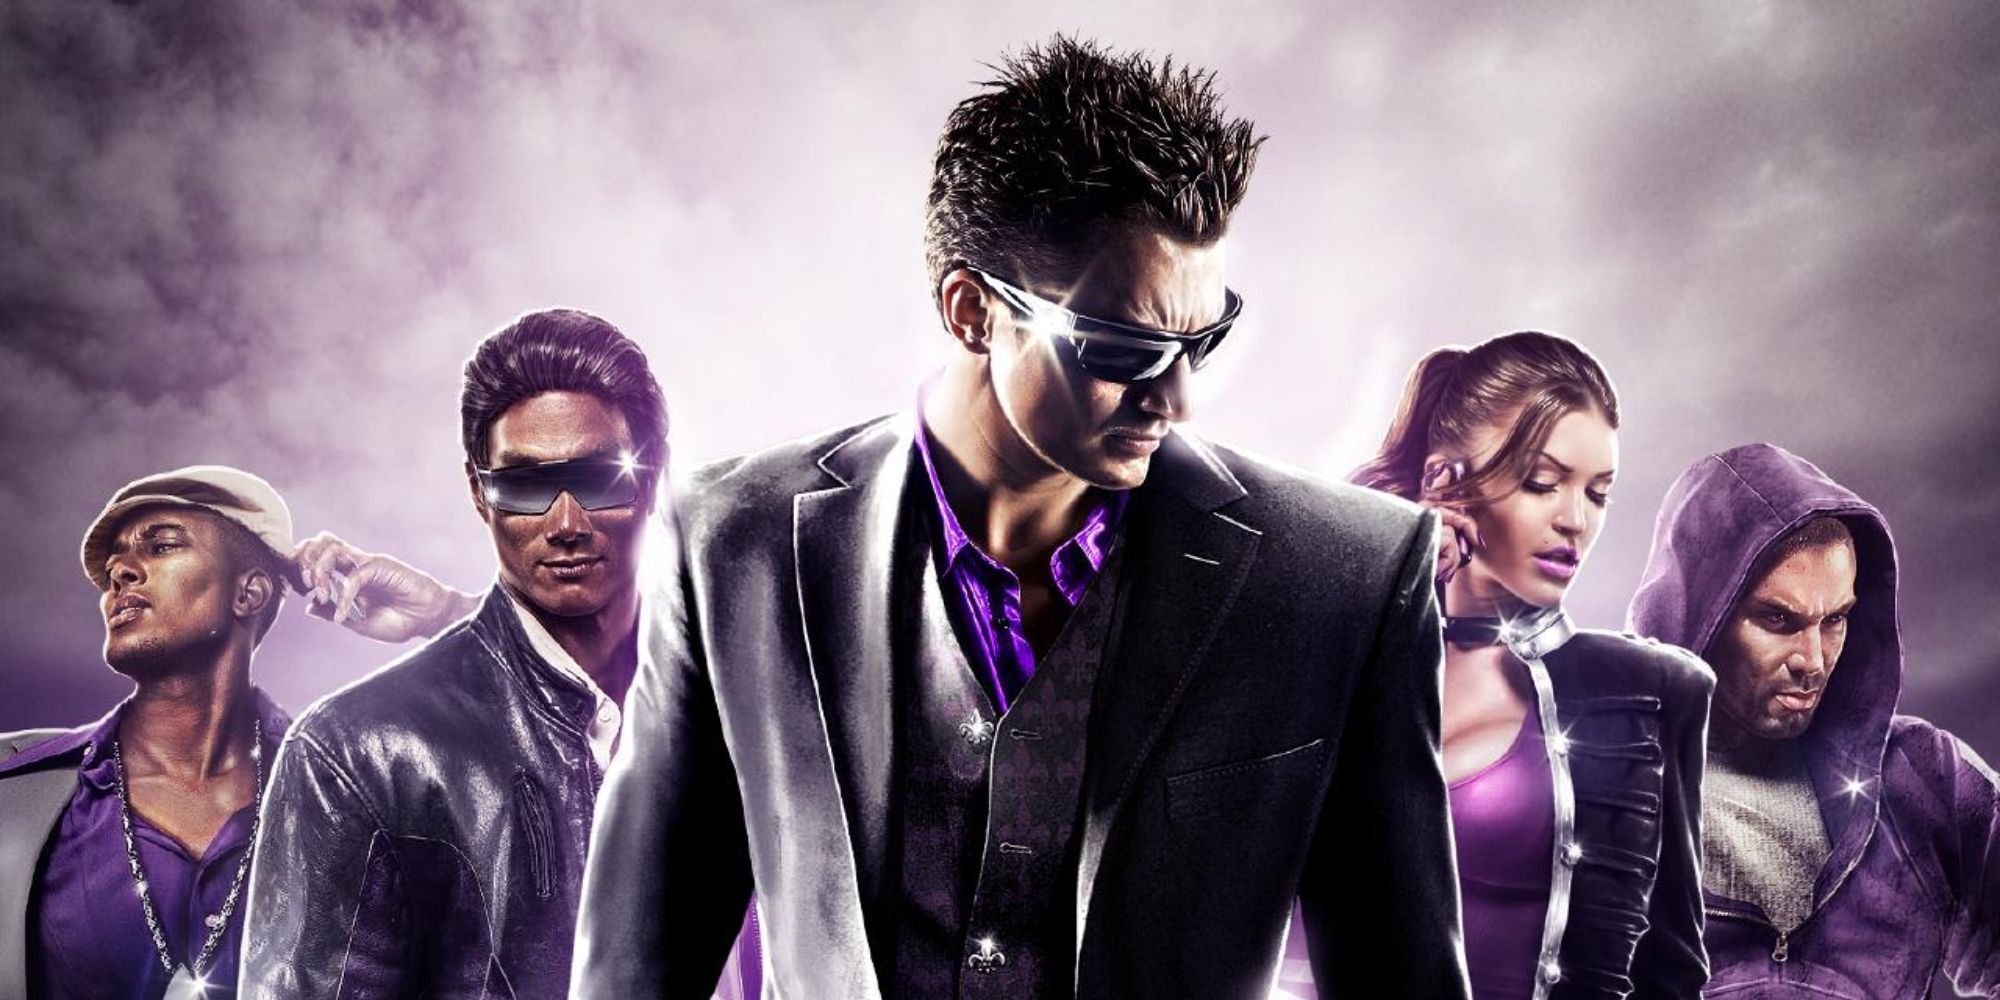 The protagonist, Shaundi, Pierce, Johnny, and Angel in Saints Row The Third.